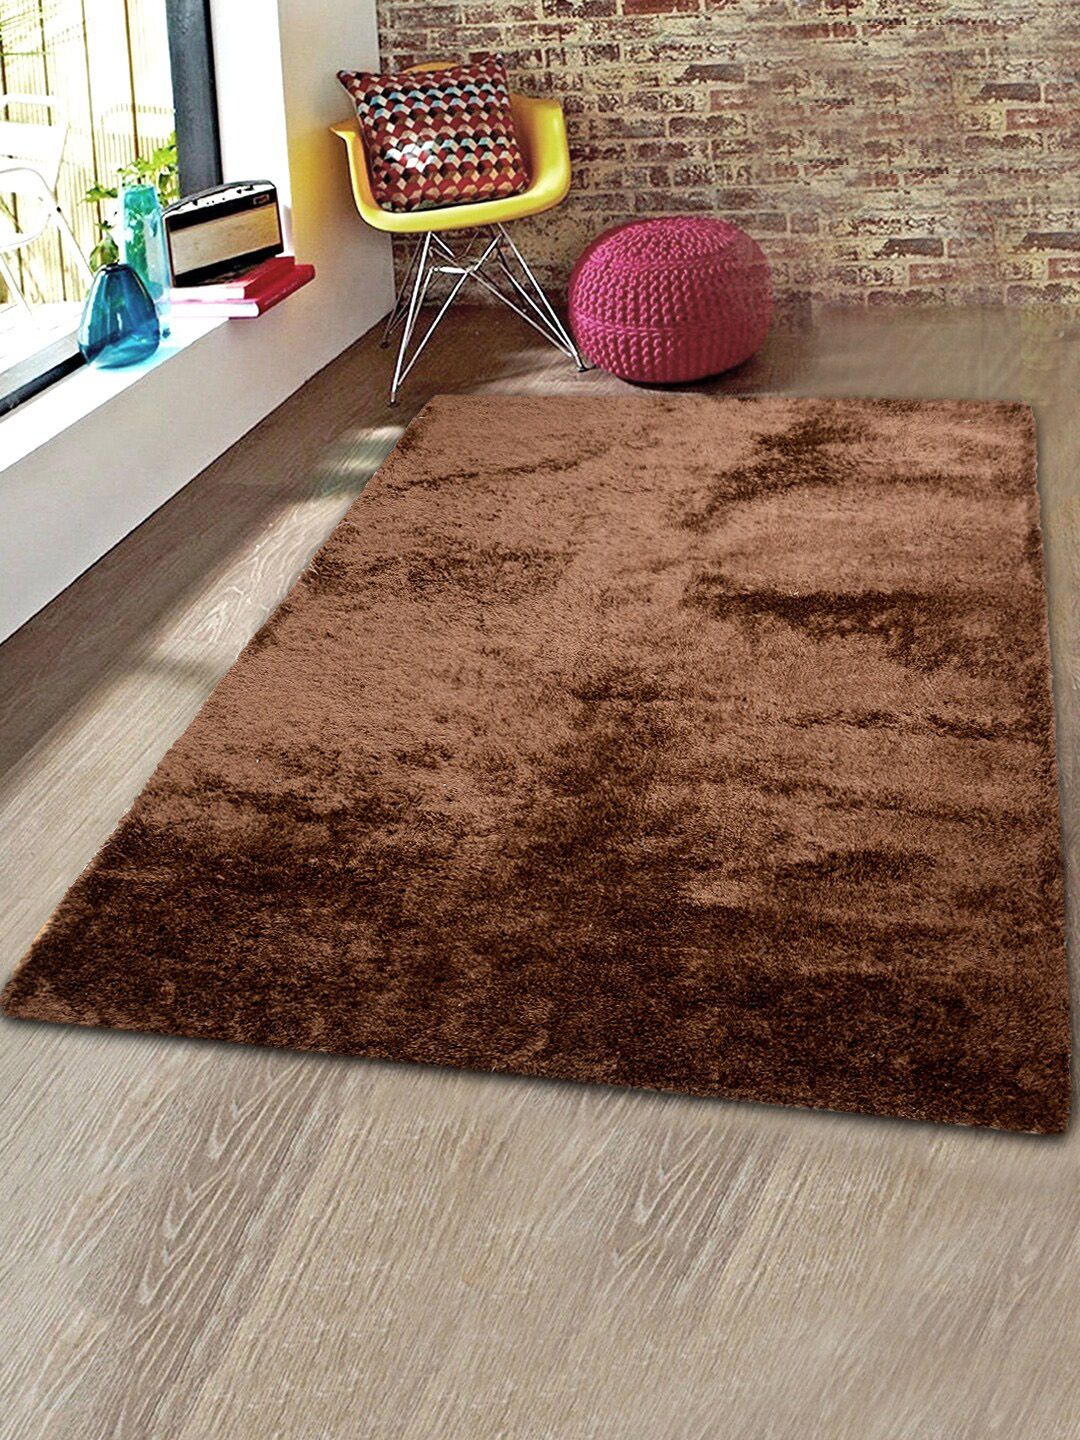 Saral Home Brown Solid Cotton Soft Heavy Duty Shaggy Carpet Price in India